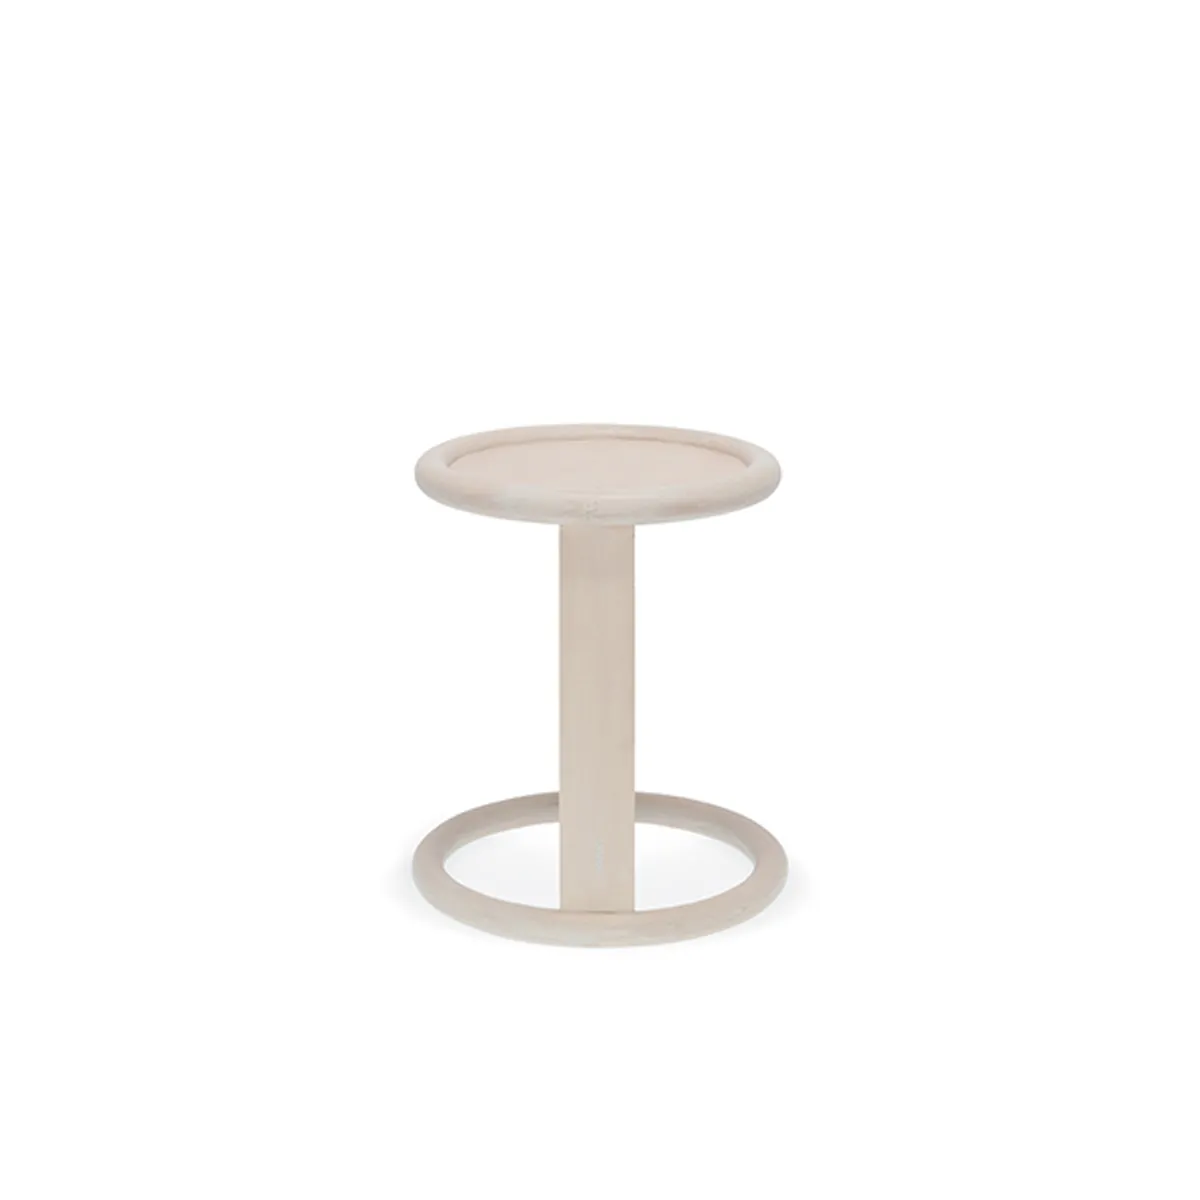 Bakerloo Side Table Contemporary Hotel Furniture By Insideoutcontracts 020